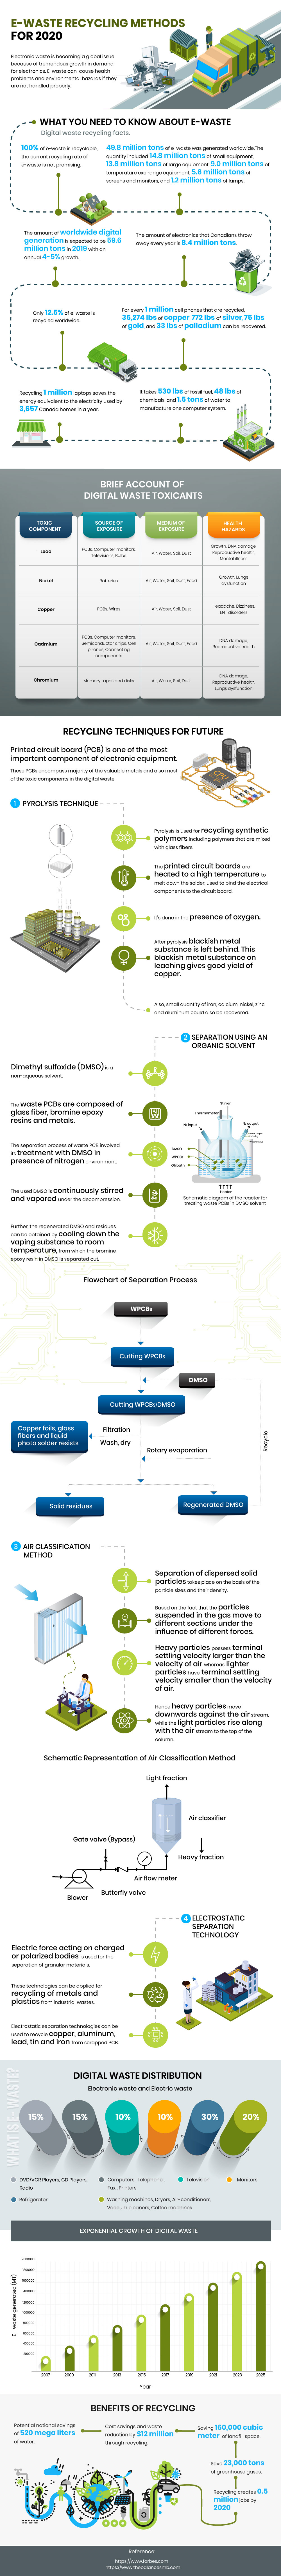 Infographic identifying future e-waste recycling methods.